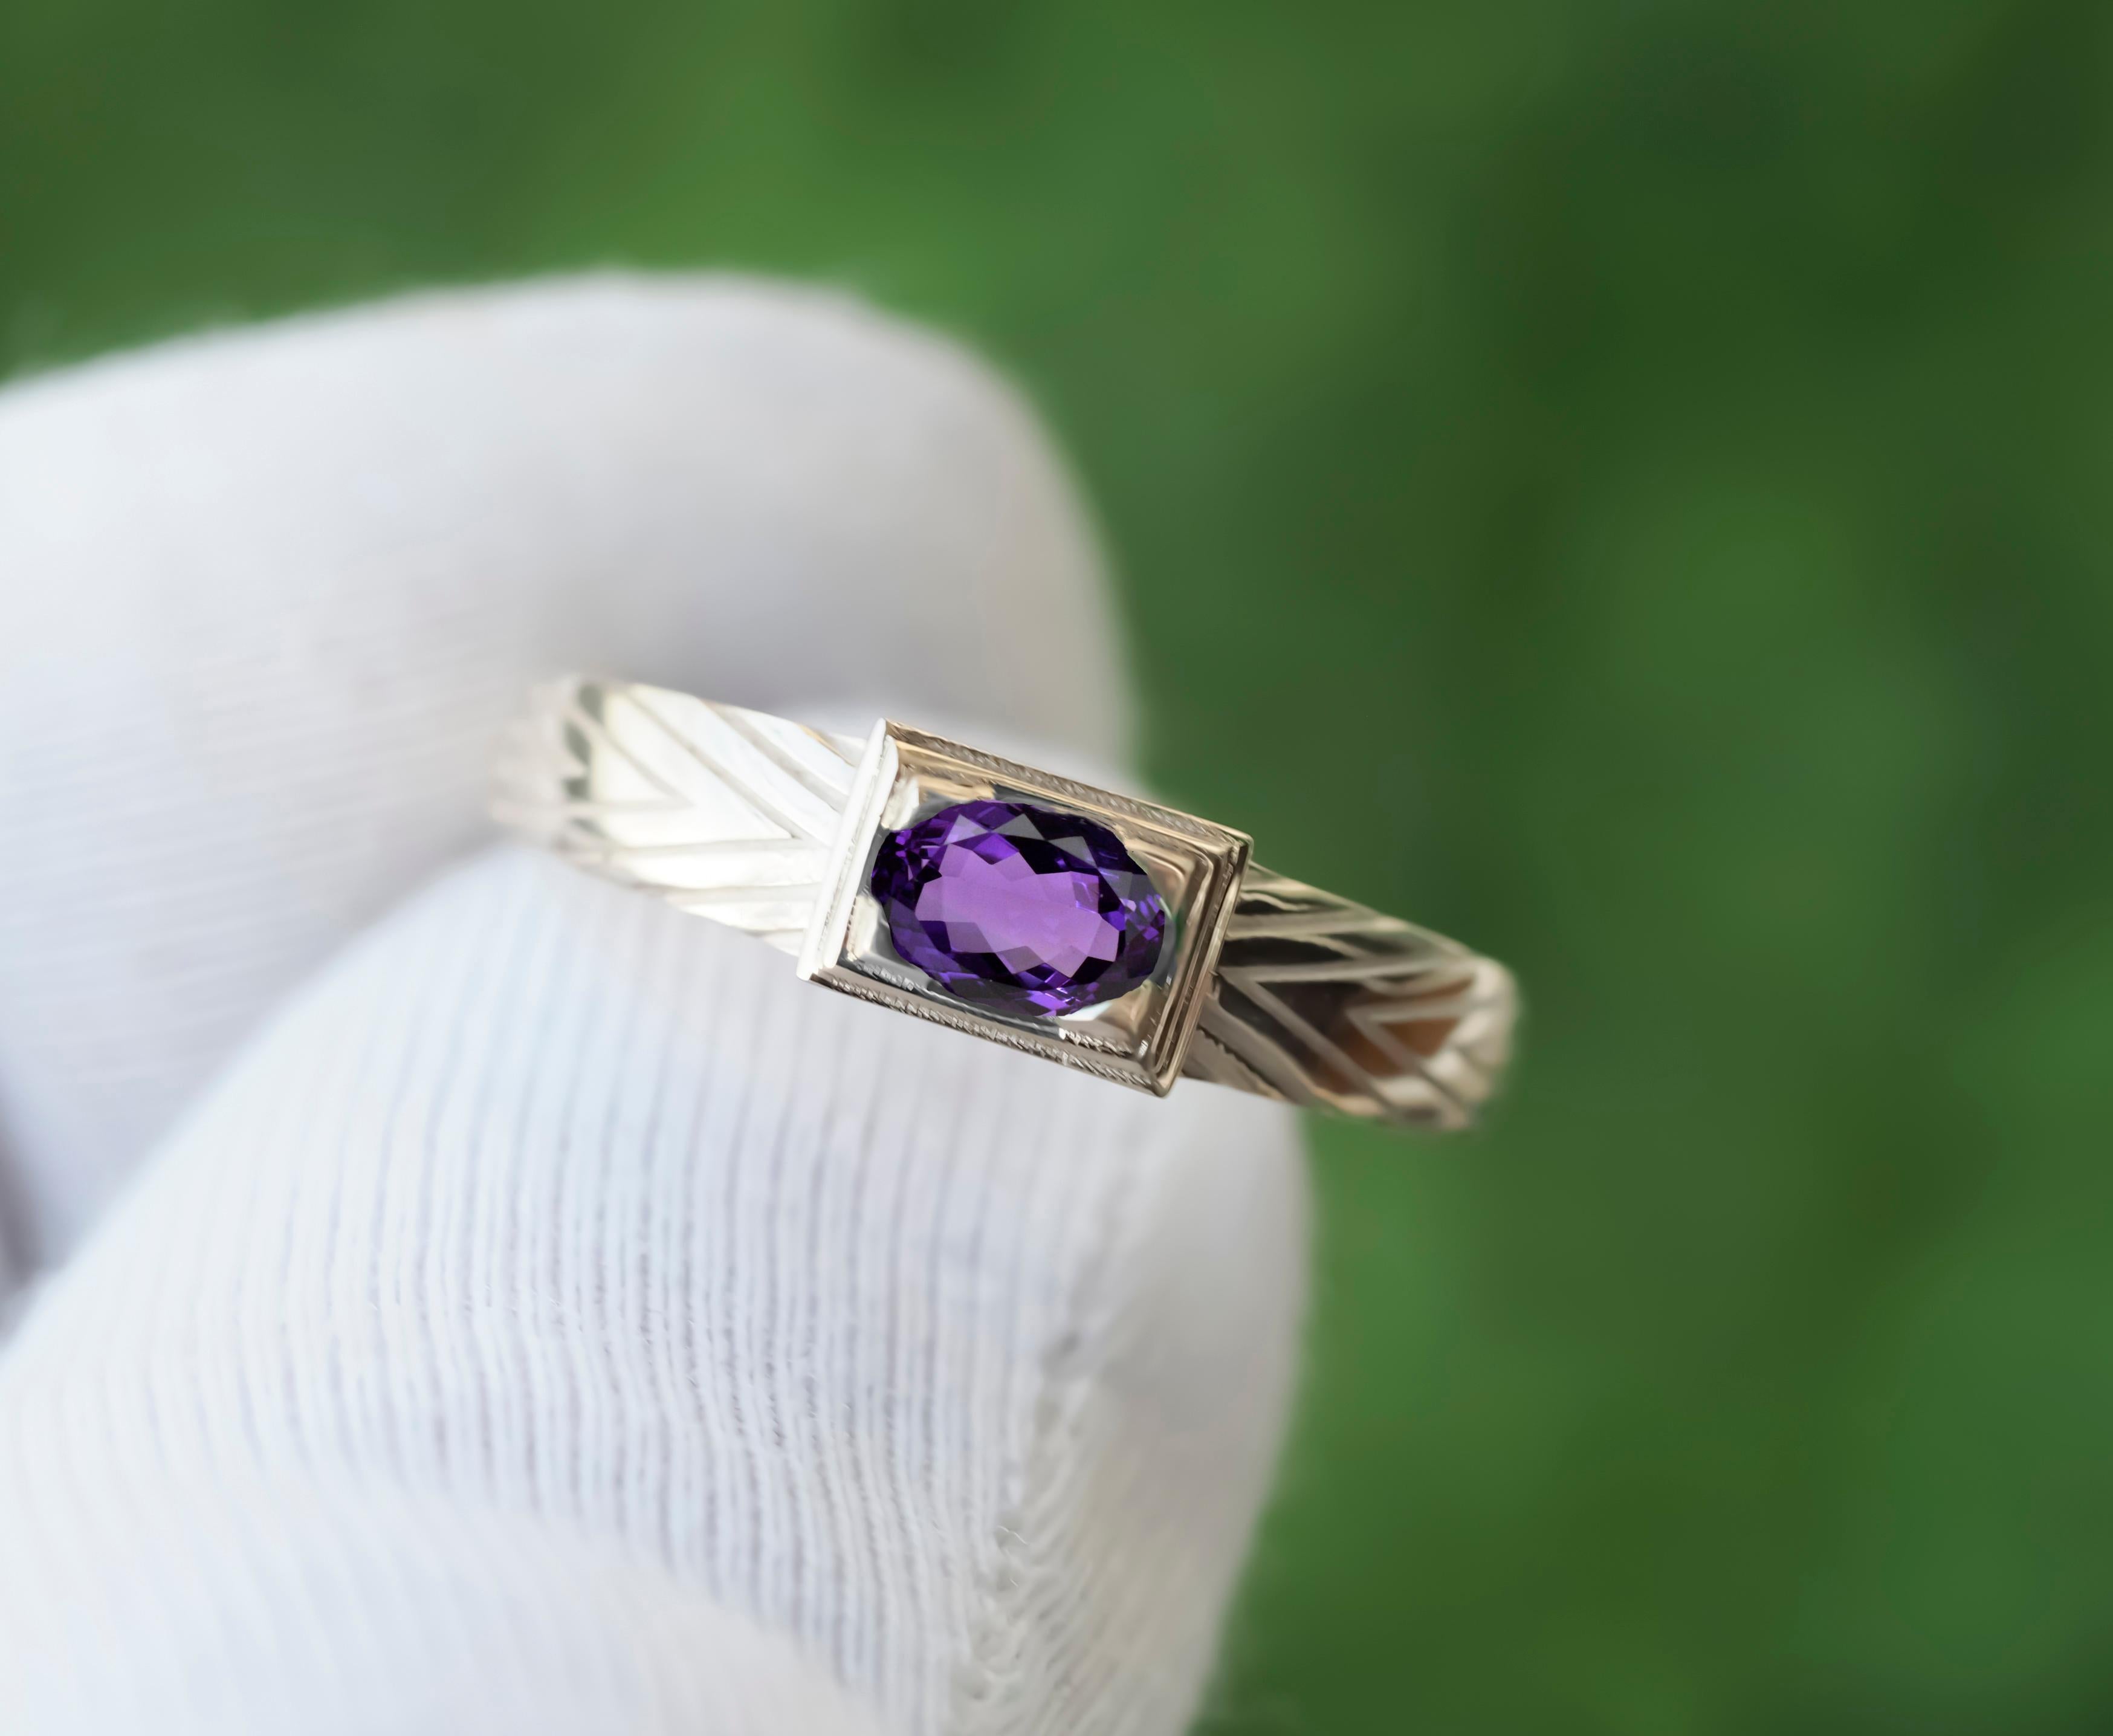 Men's 14K Gold Mens Ring with Amethyst.  For Sale